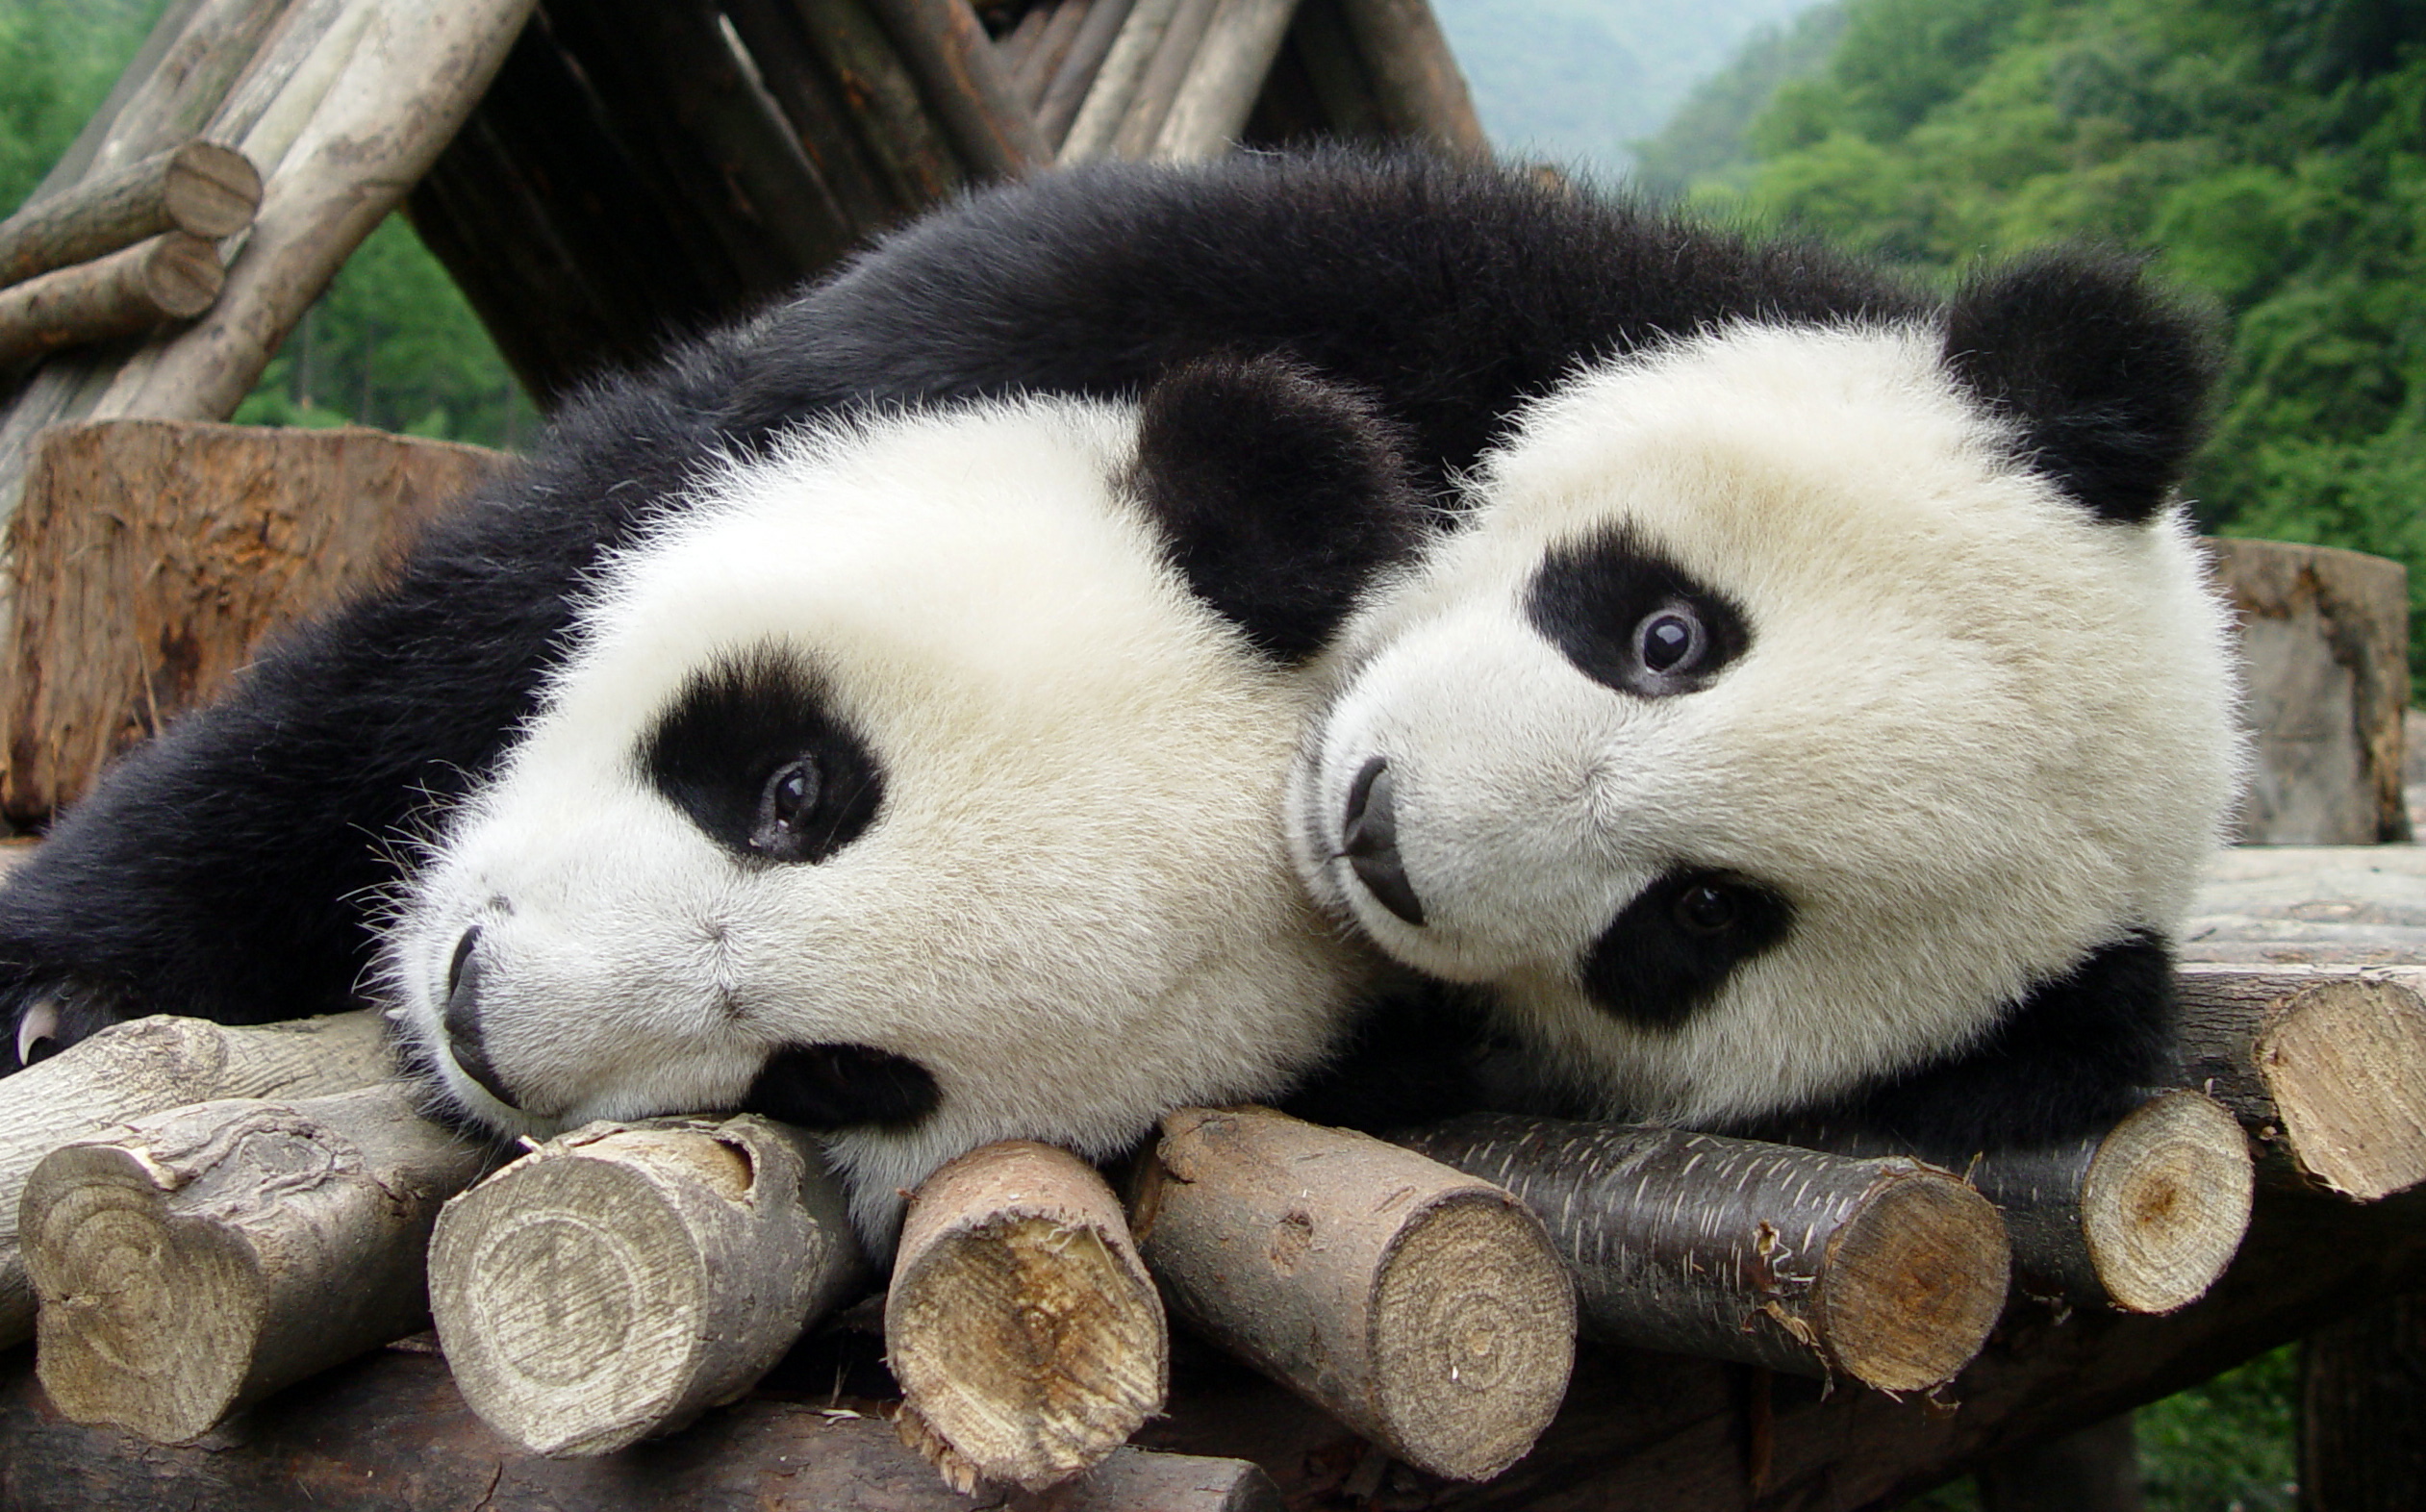 PHOTO: Two giant pandas play at China Giant Panda Protection and Research Centre in Wolong National Natural Reserve, southwest China's Sichuan province, in this May 14, 2005 file photo.